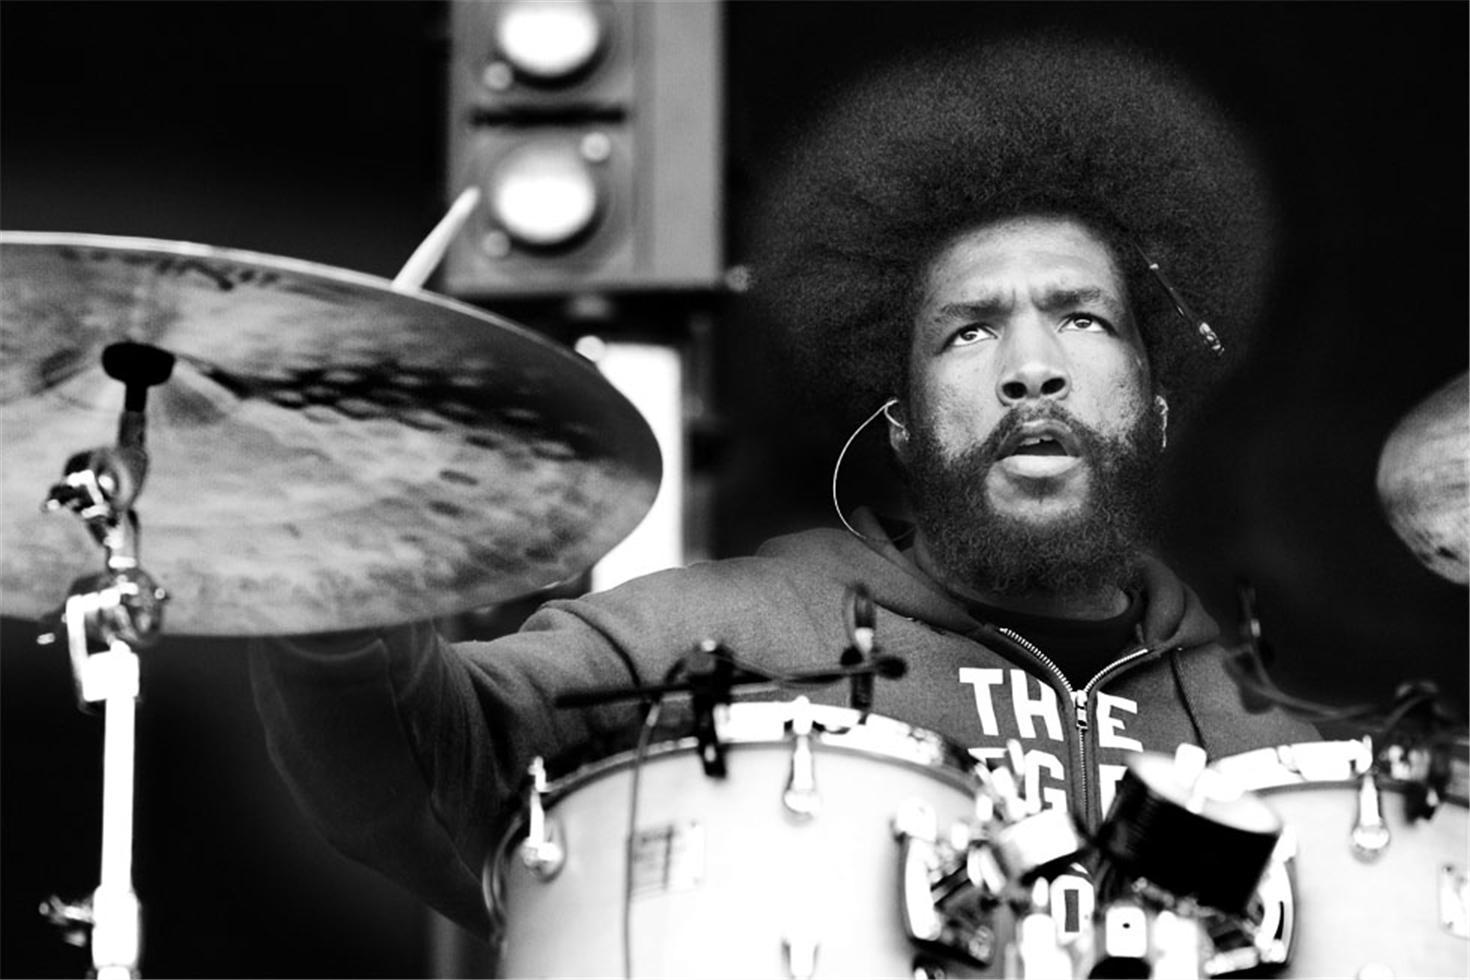 Rene Huemer Black and White Photograph - Questlove, The Roots, St.Poelten, Austria, 2008